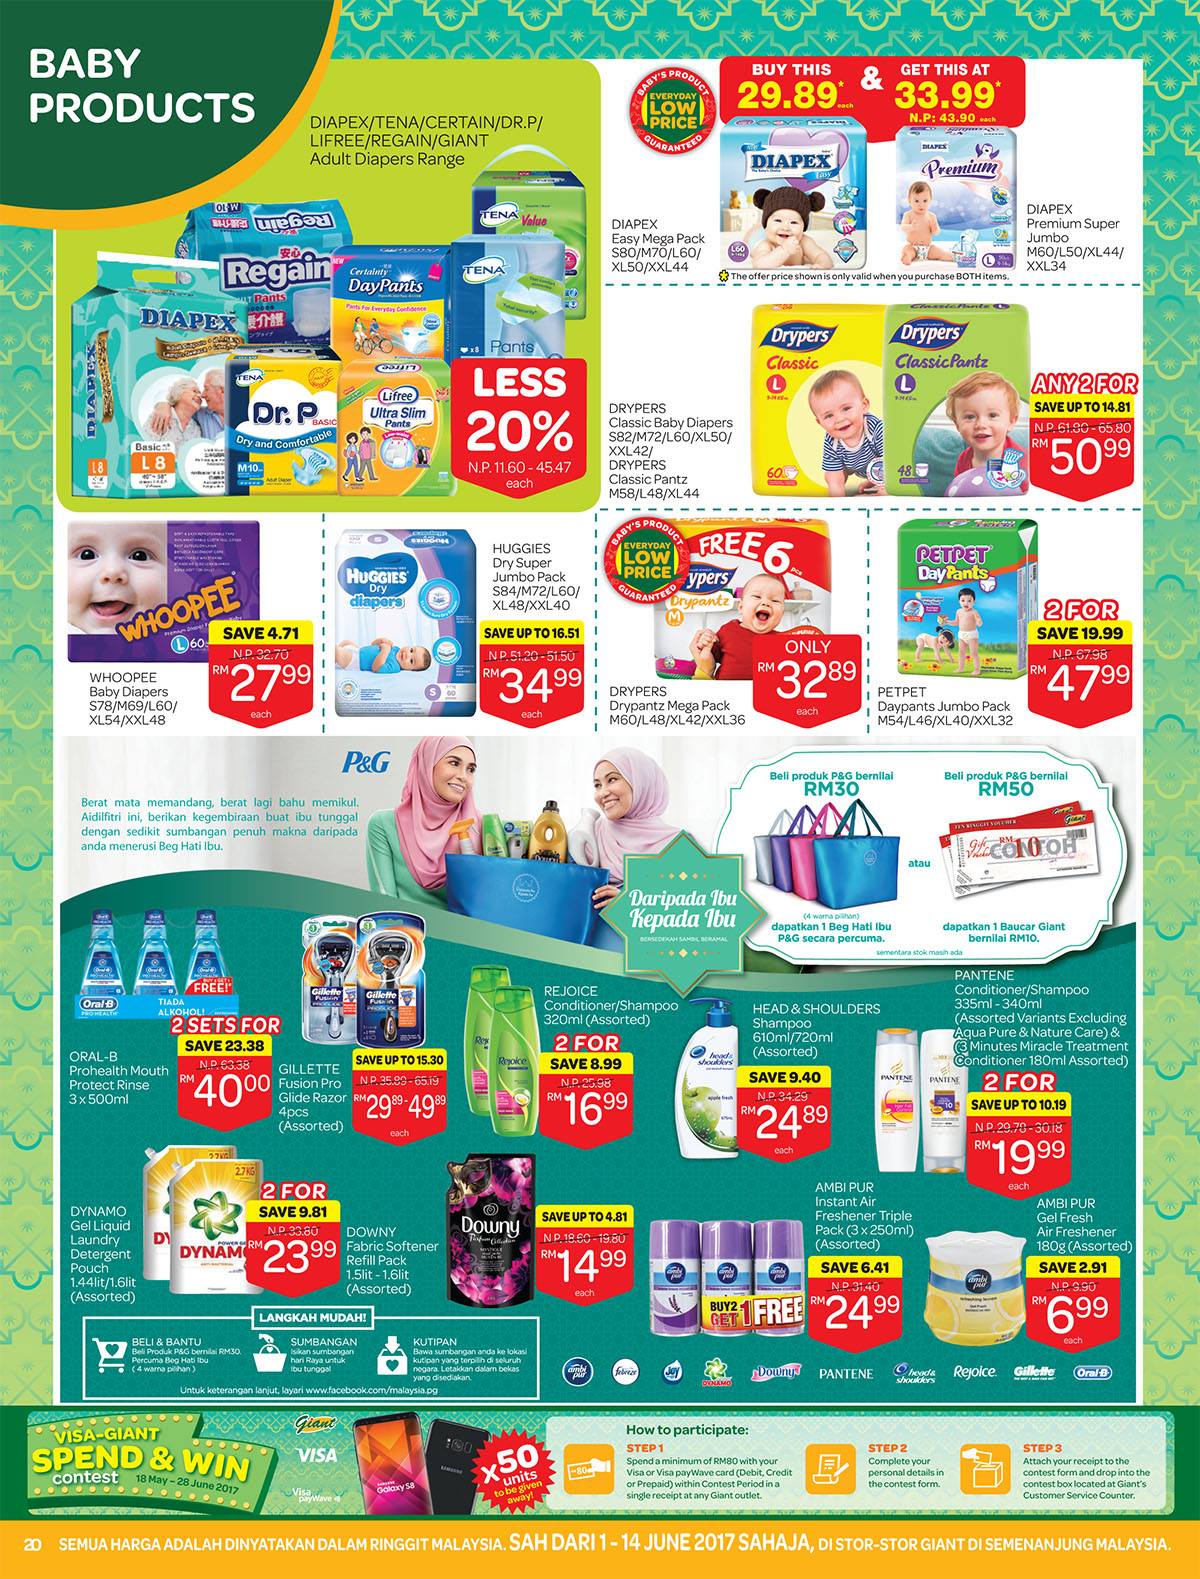  Giant Catalogue  Promotional Discounted Price Offers Until 